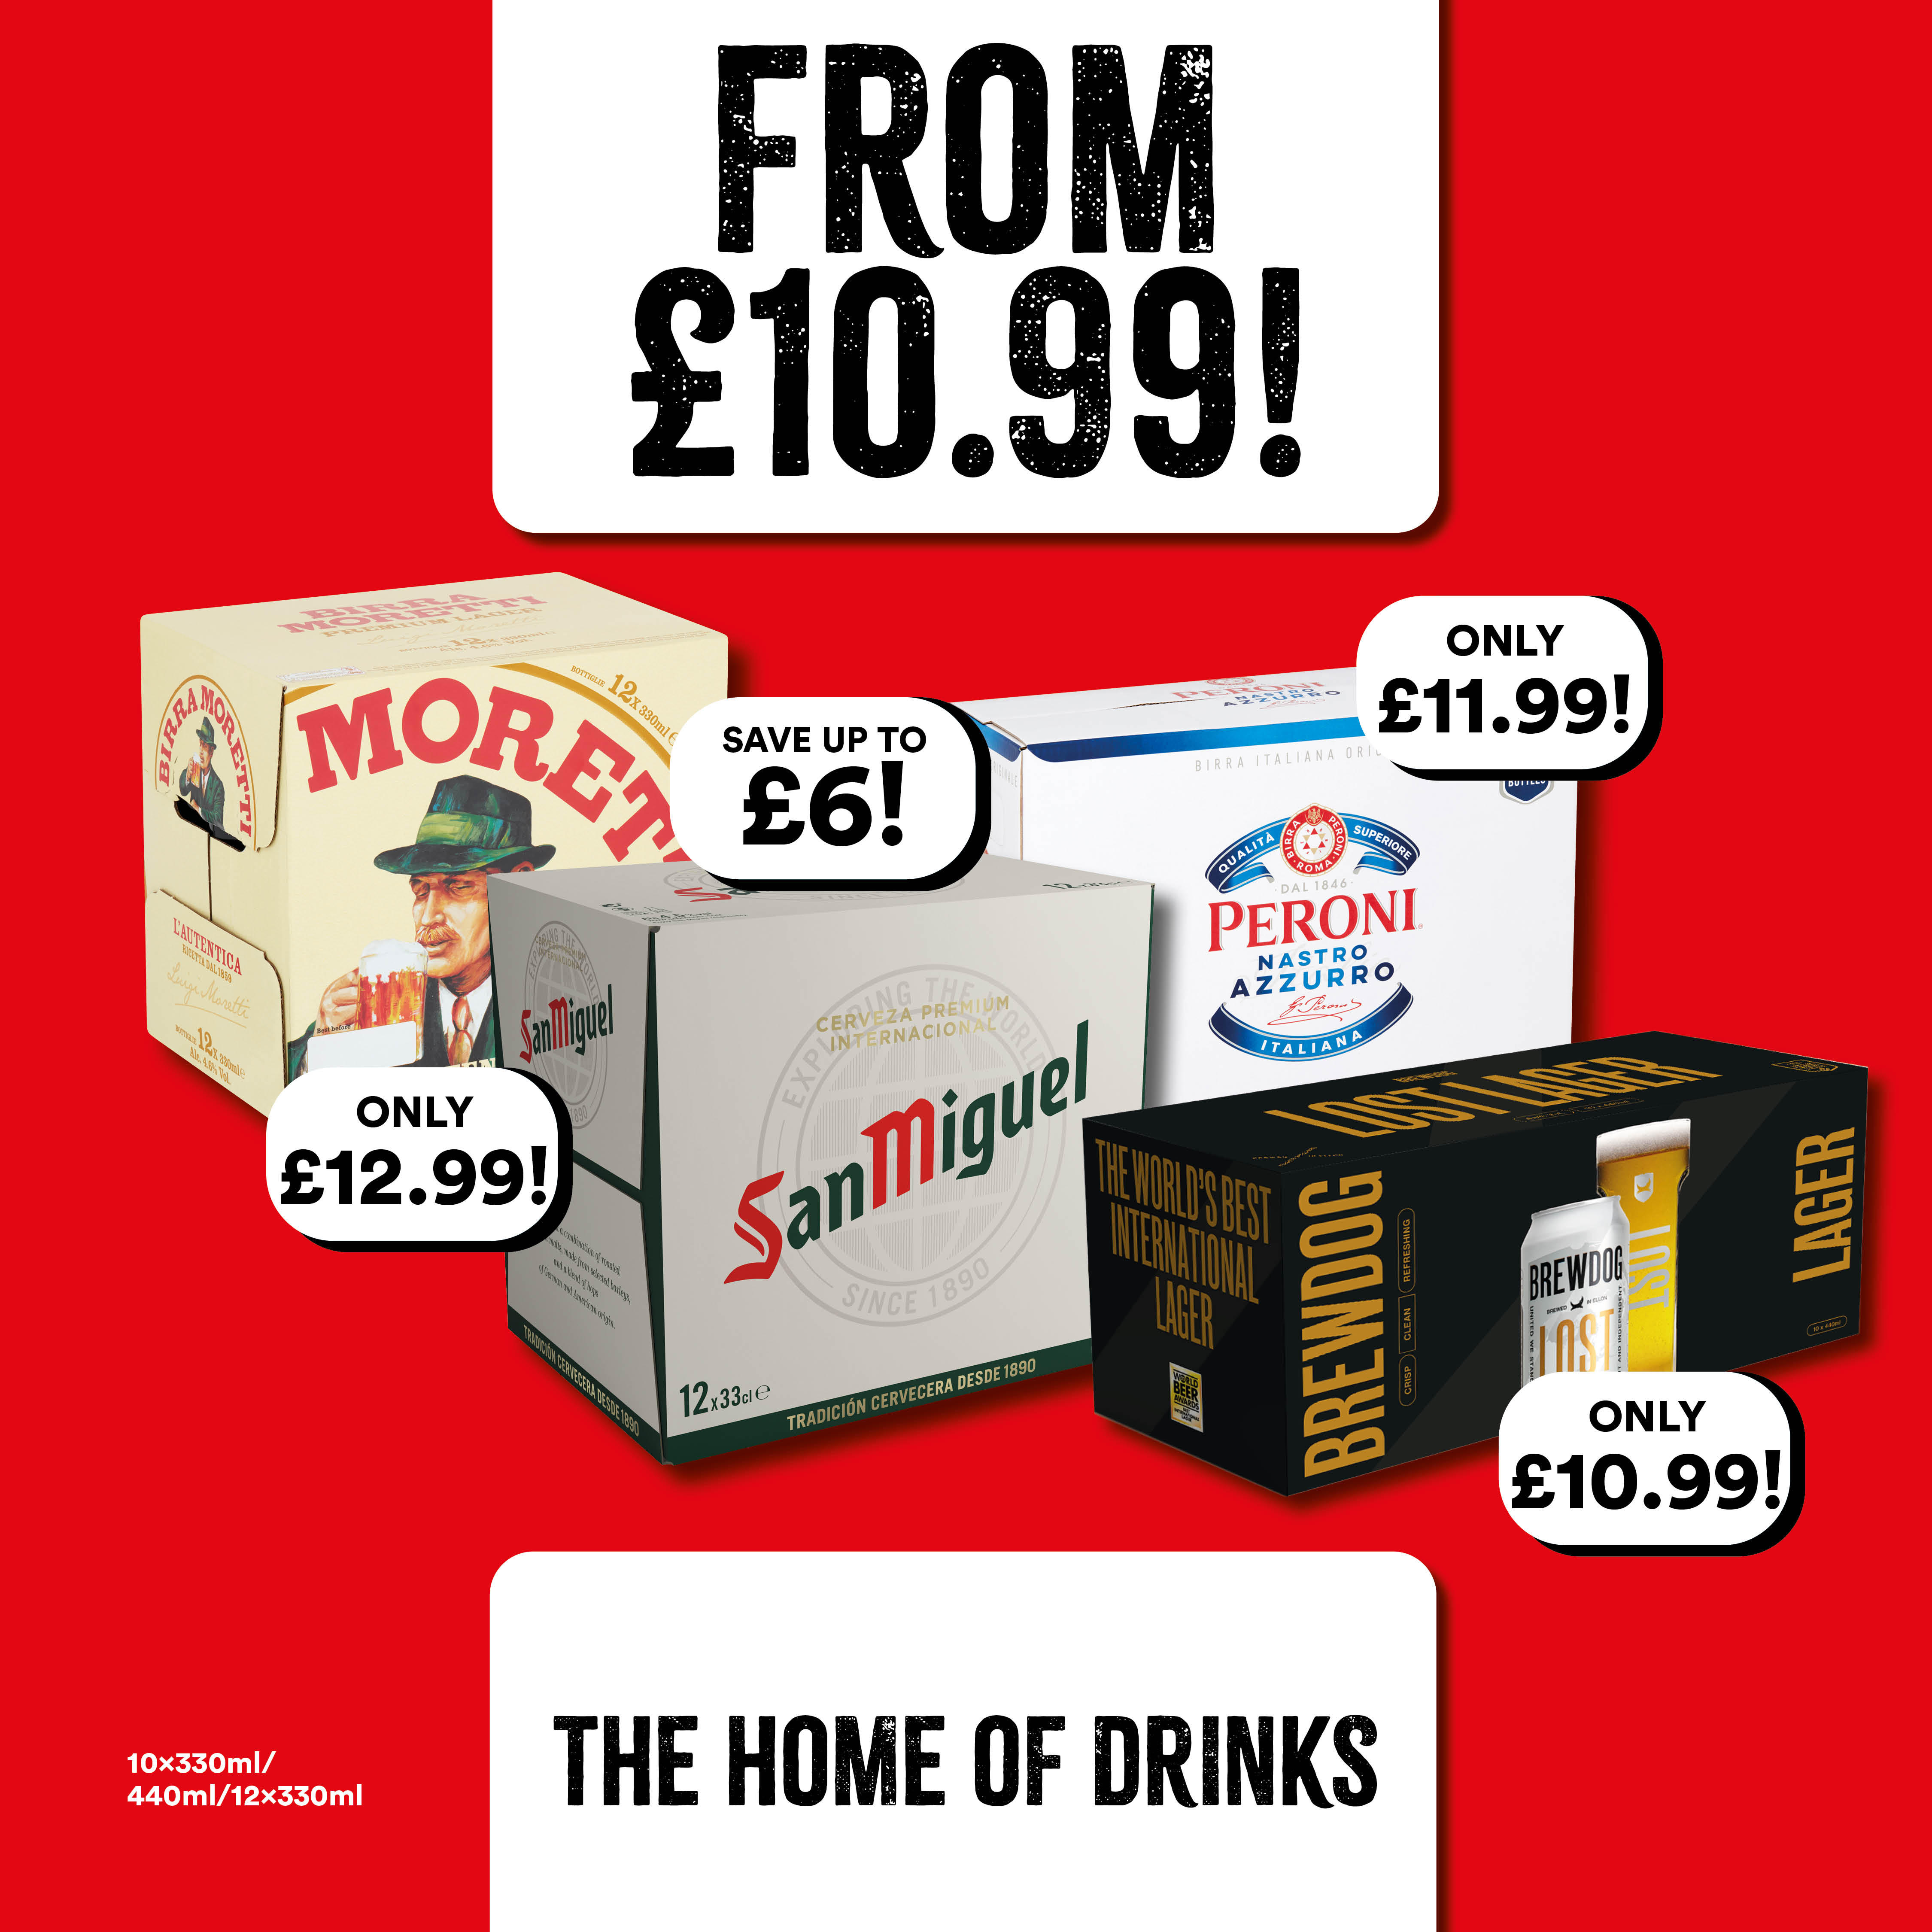 From £10.99 on 10 x 330ml/440ml & 12 x 330ml Beers Bargain Booze Newport Pagnell 01908 612653